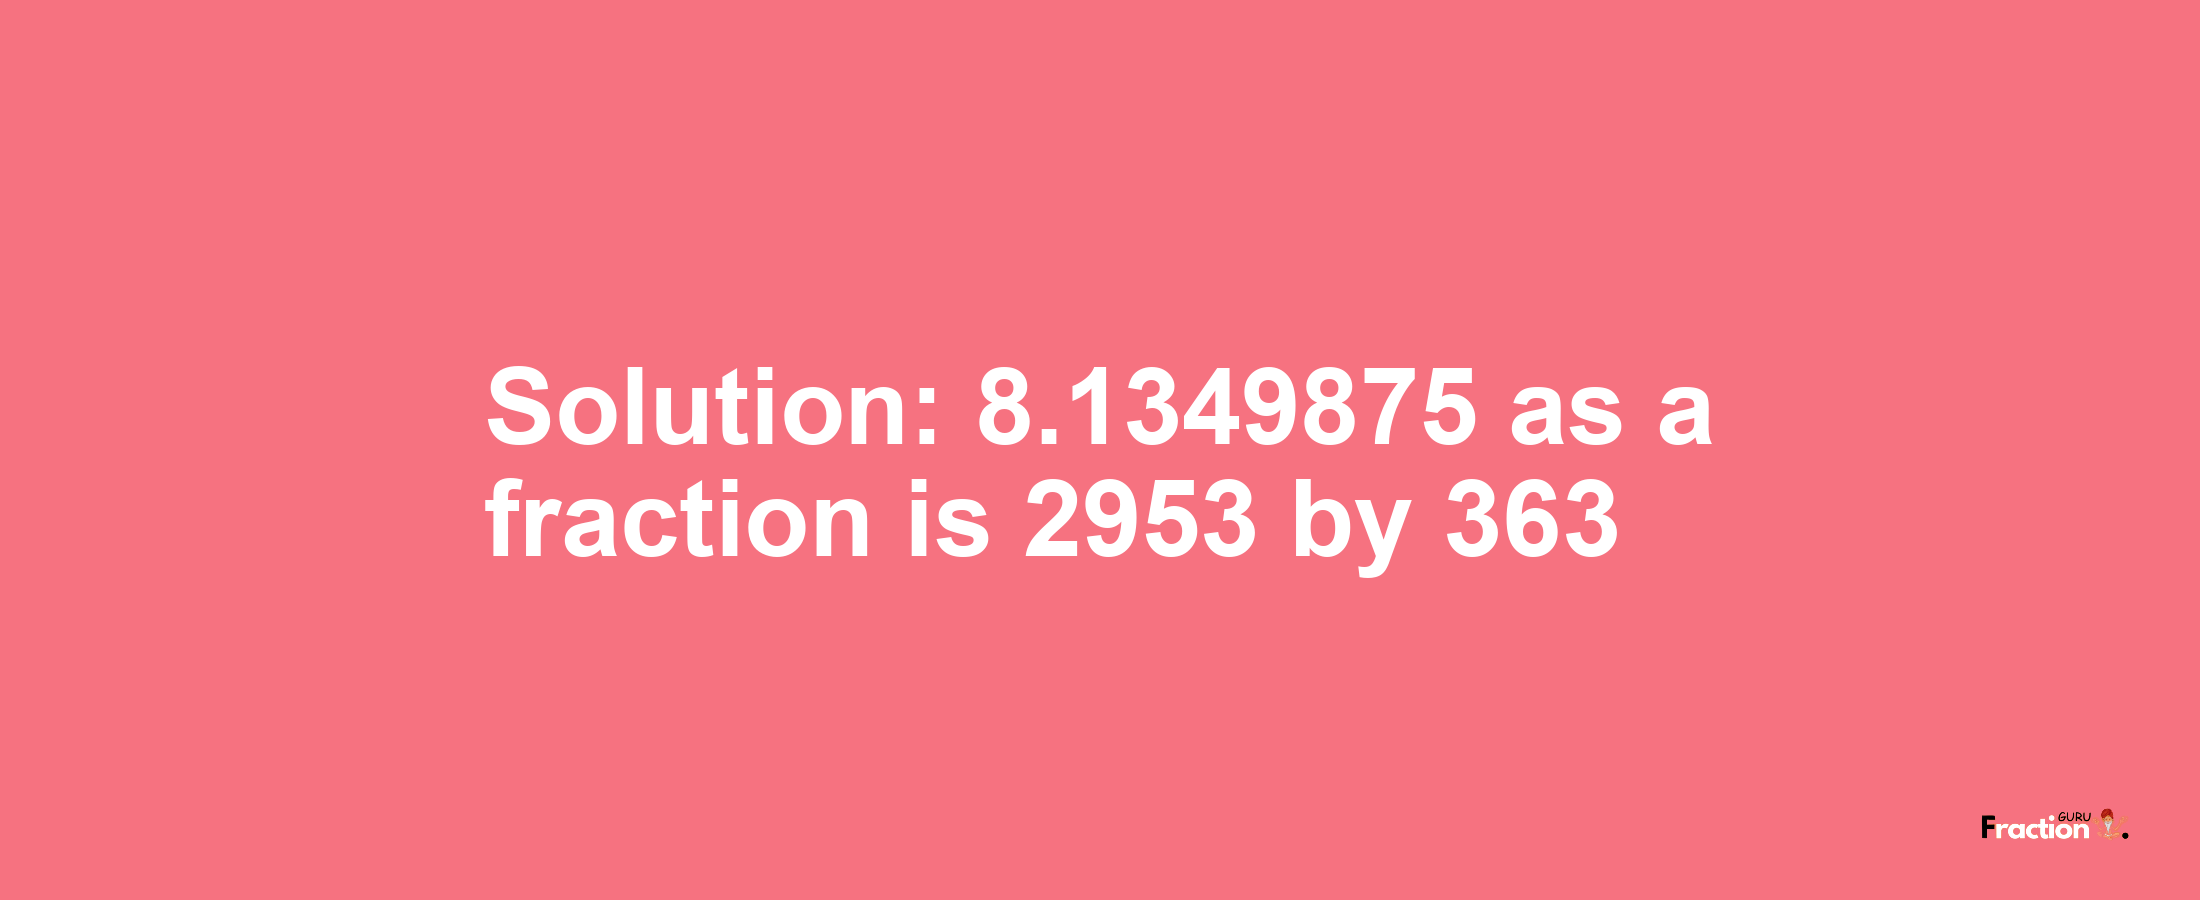 Solution:8.1349875 as a fraction is 2953/363